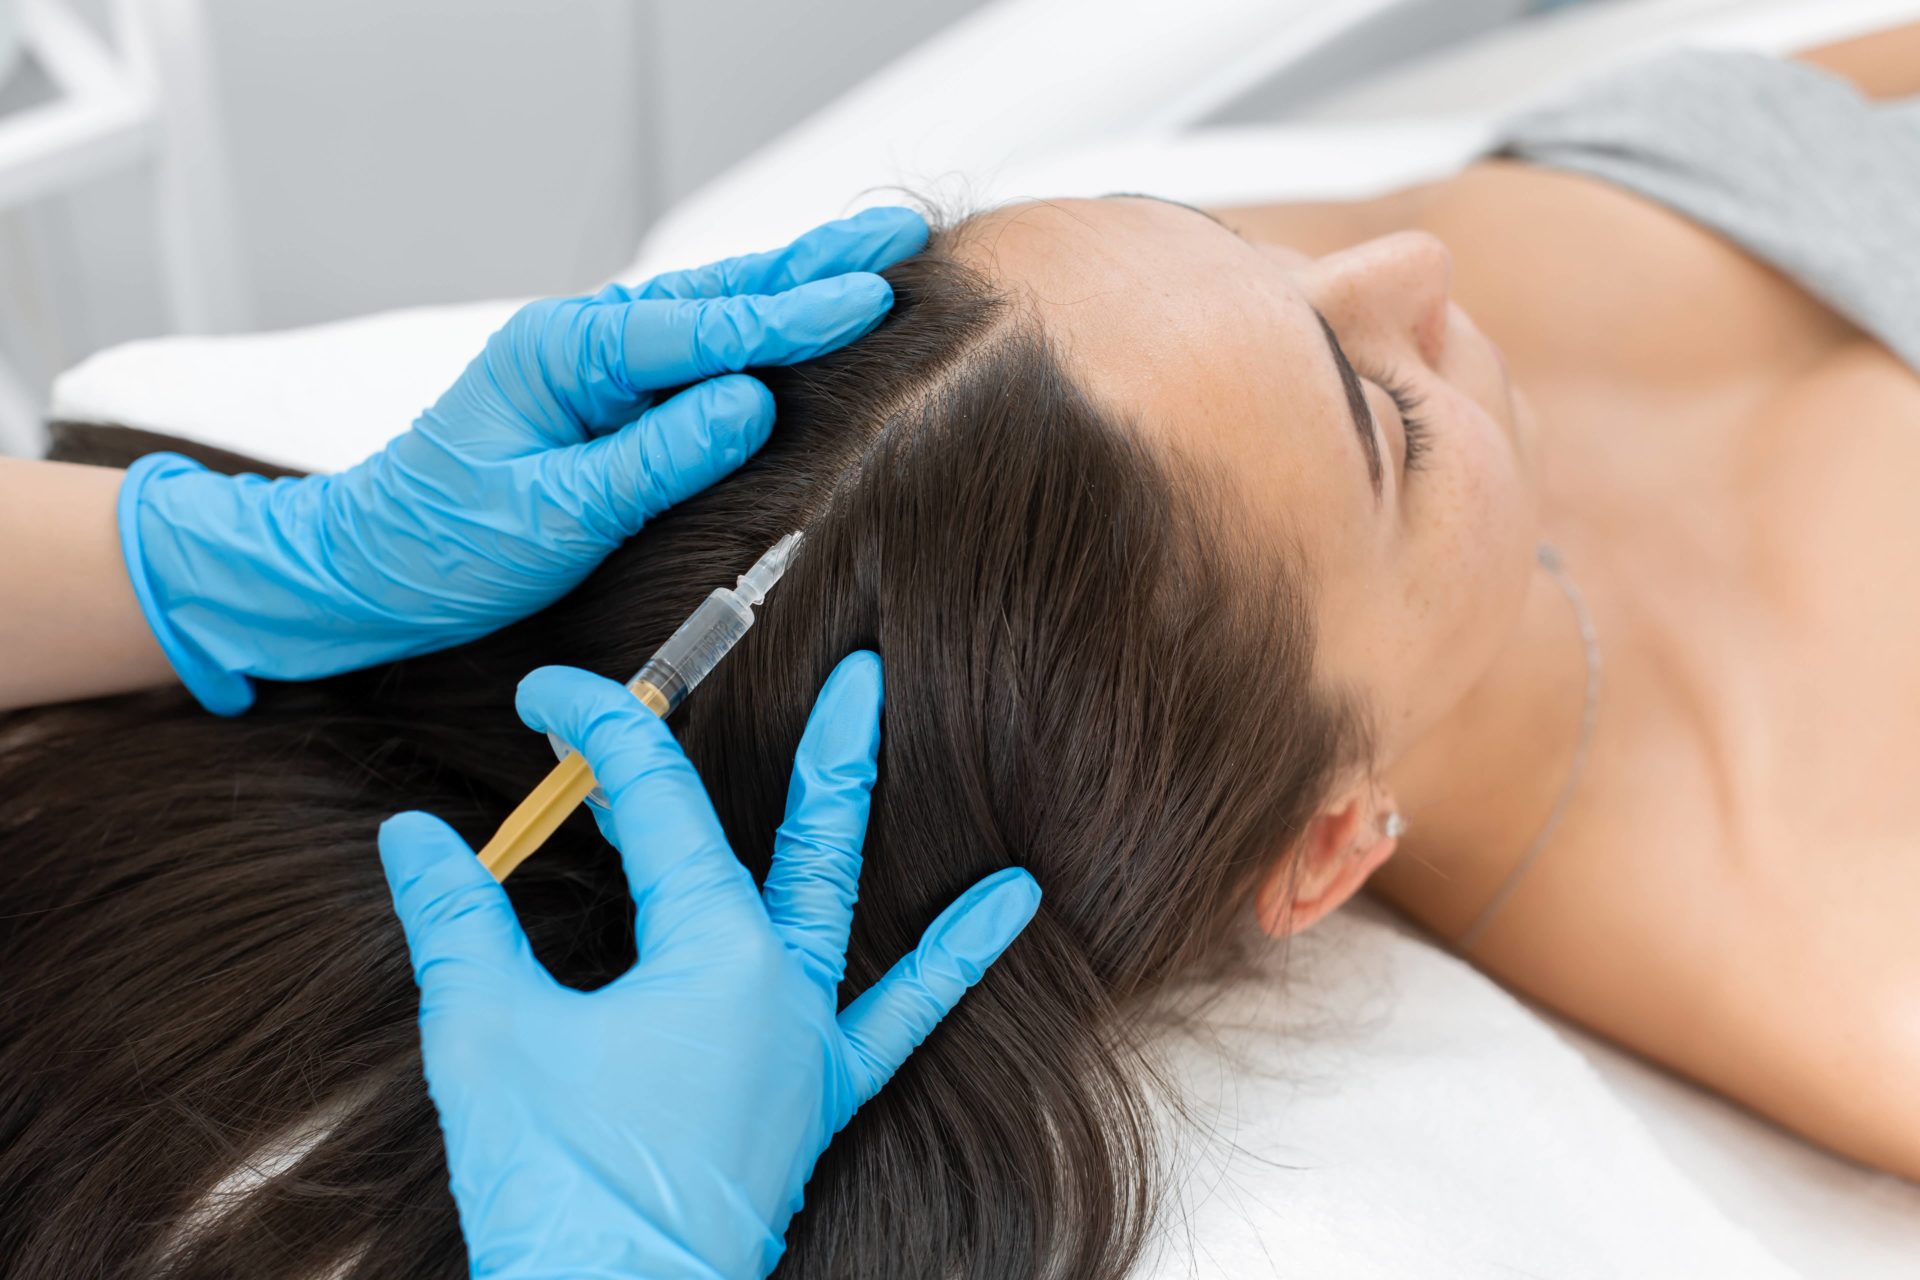 PRP works best on people with hyperpigmentation, acne scars, fine lines, and wrinkles. Within a month, you ought to notice a change in the texture of your skin and fewer scarring and dark patches. When treating deep wrinkles or hollows, PRP is less effective.